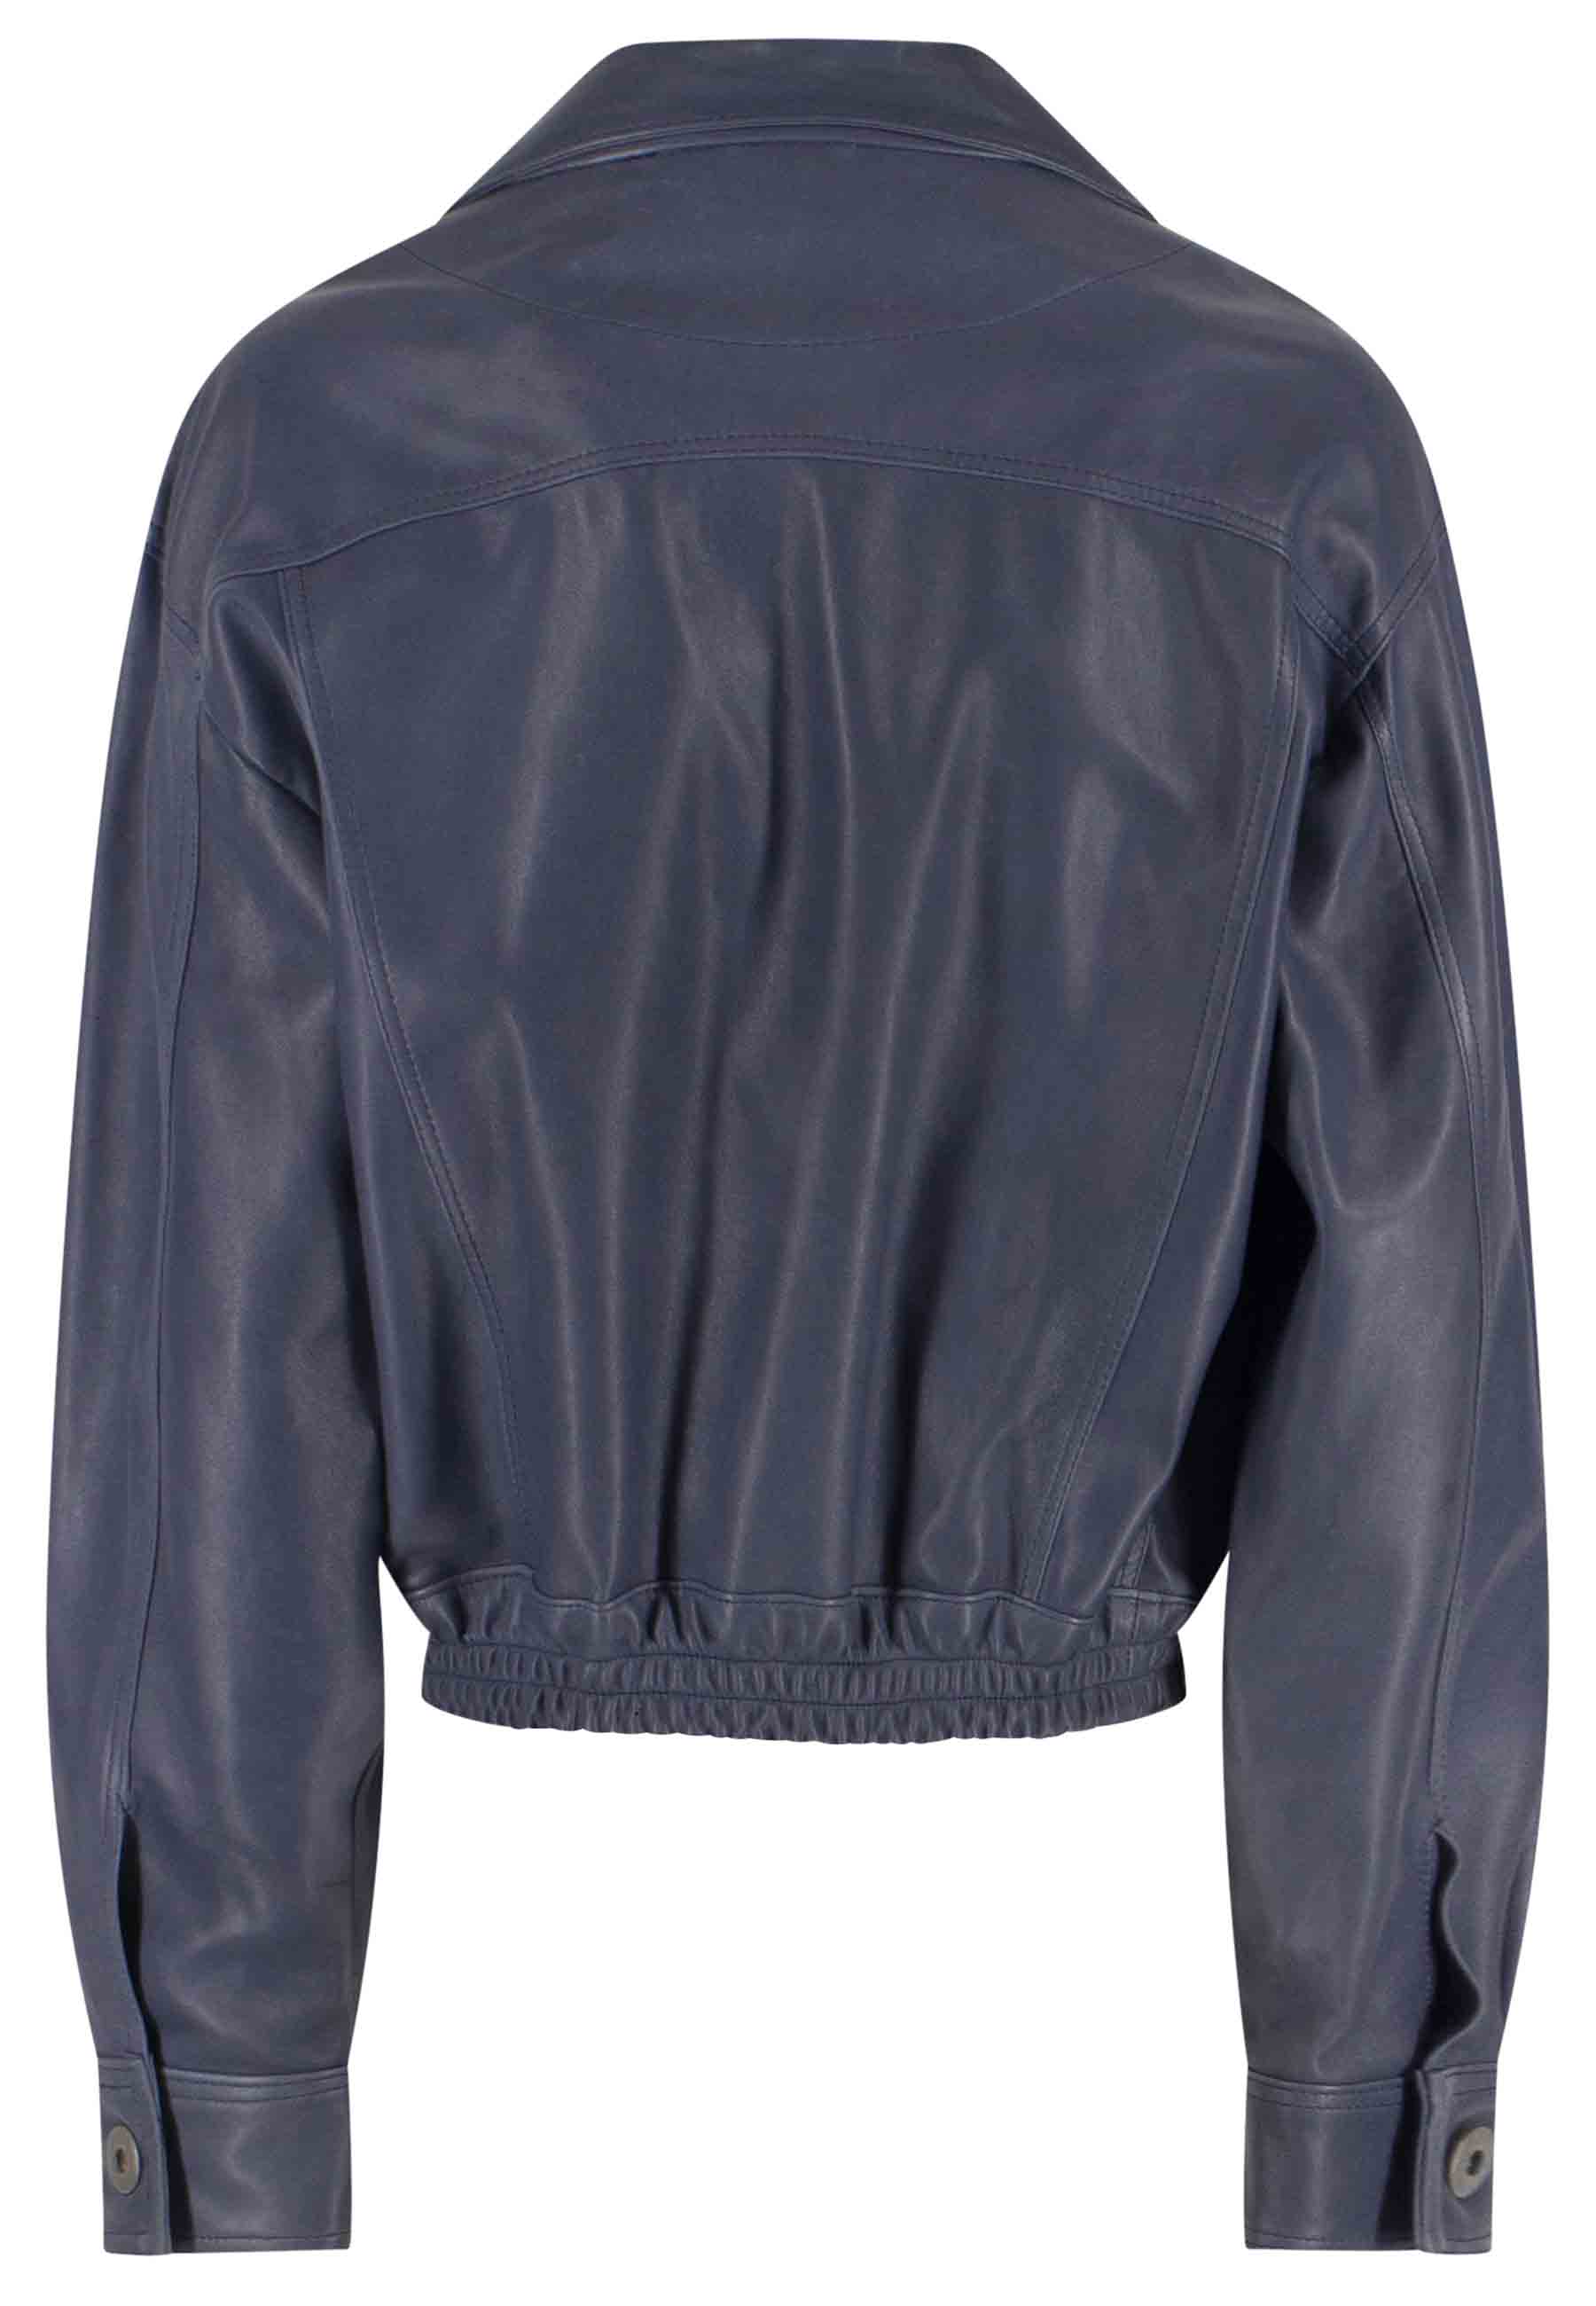 Women's short bomber jacket in unlined blue leather with elastic at the bottom